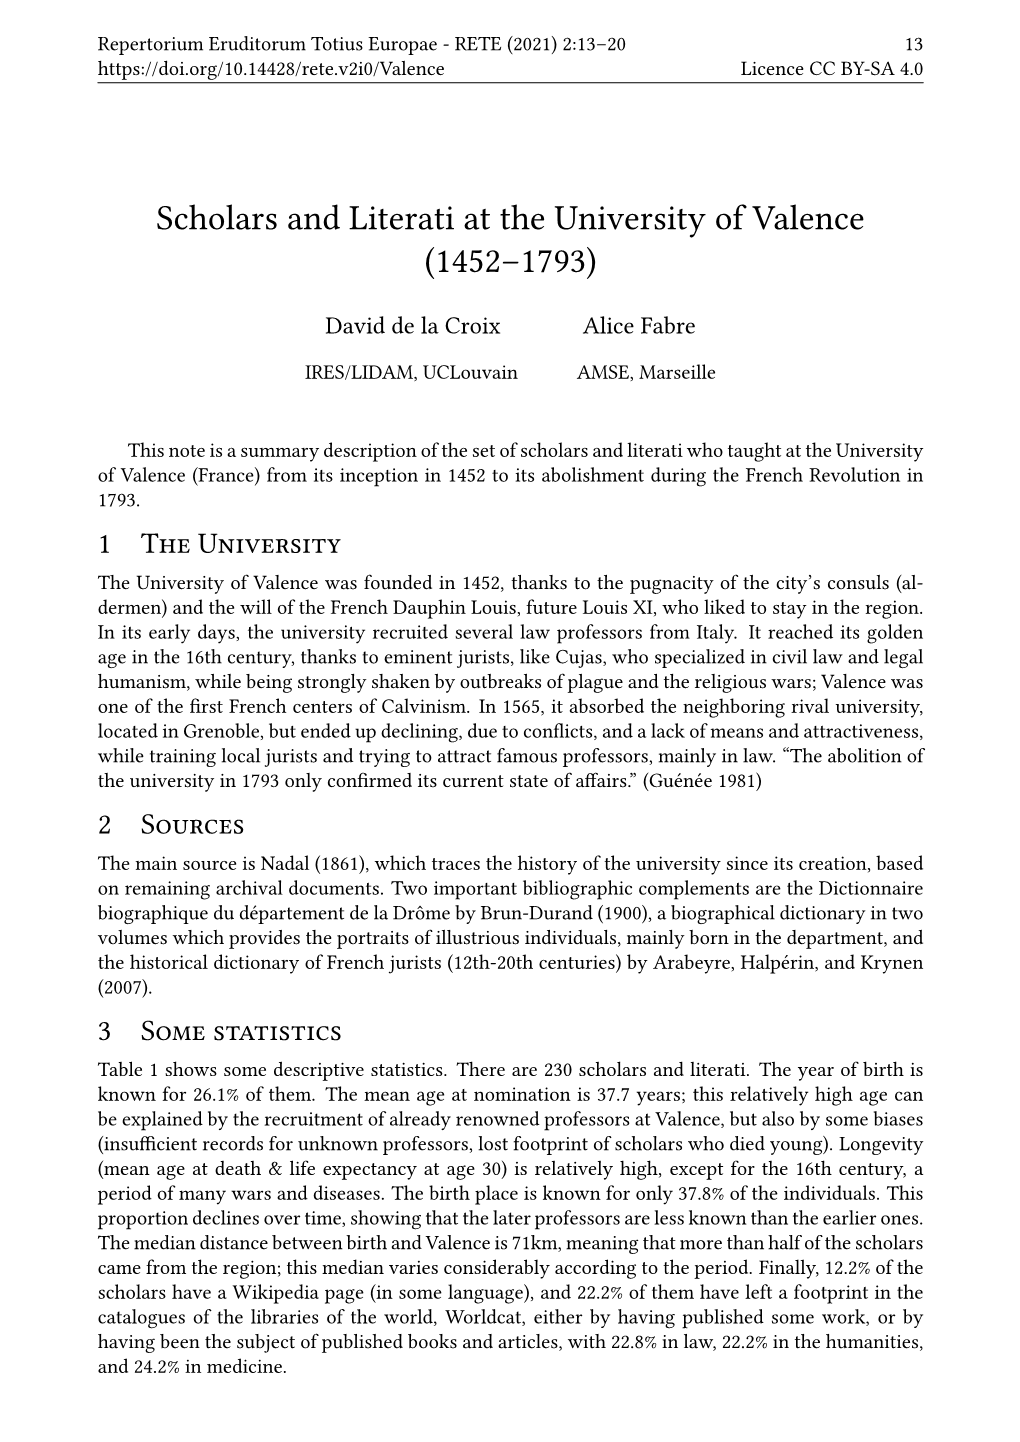 Scholars and Literati at the University of Valence (1452–1793)